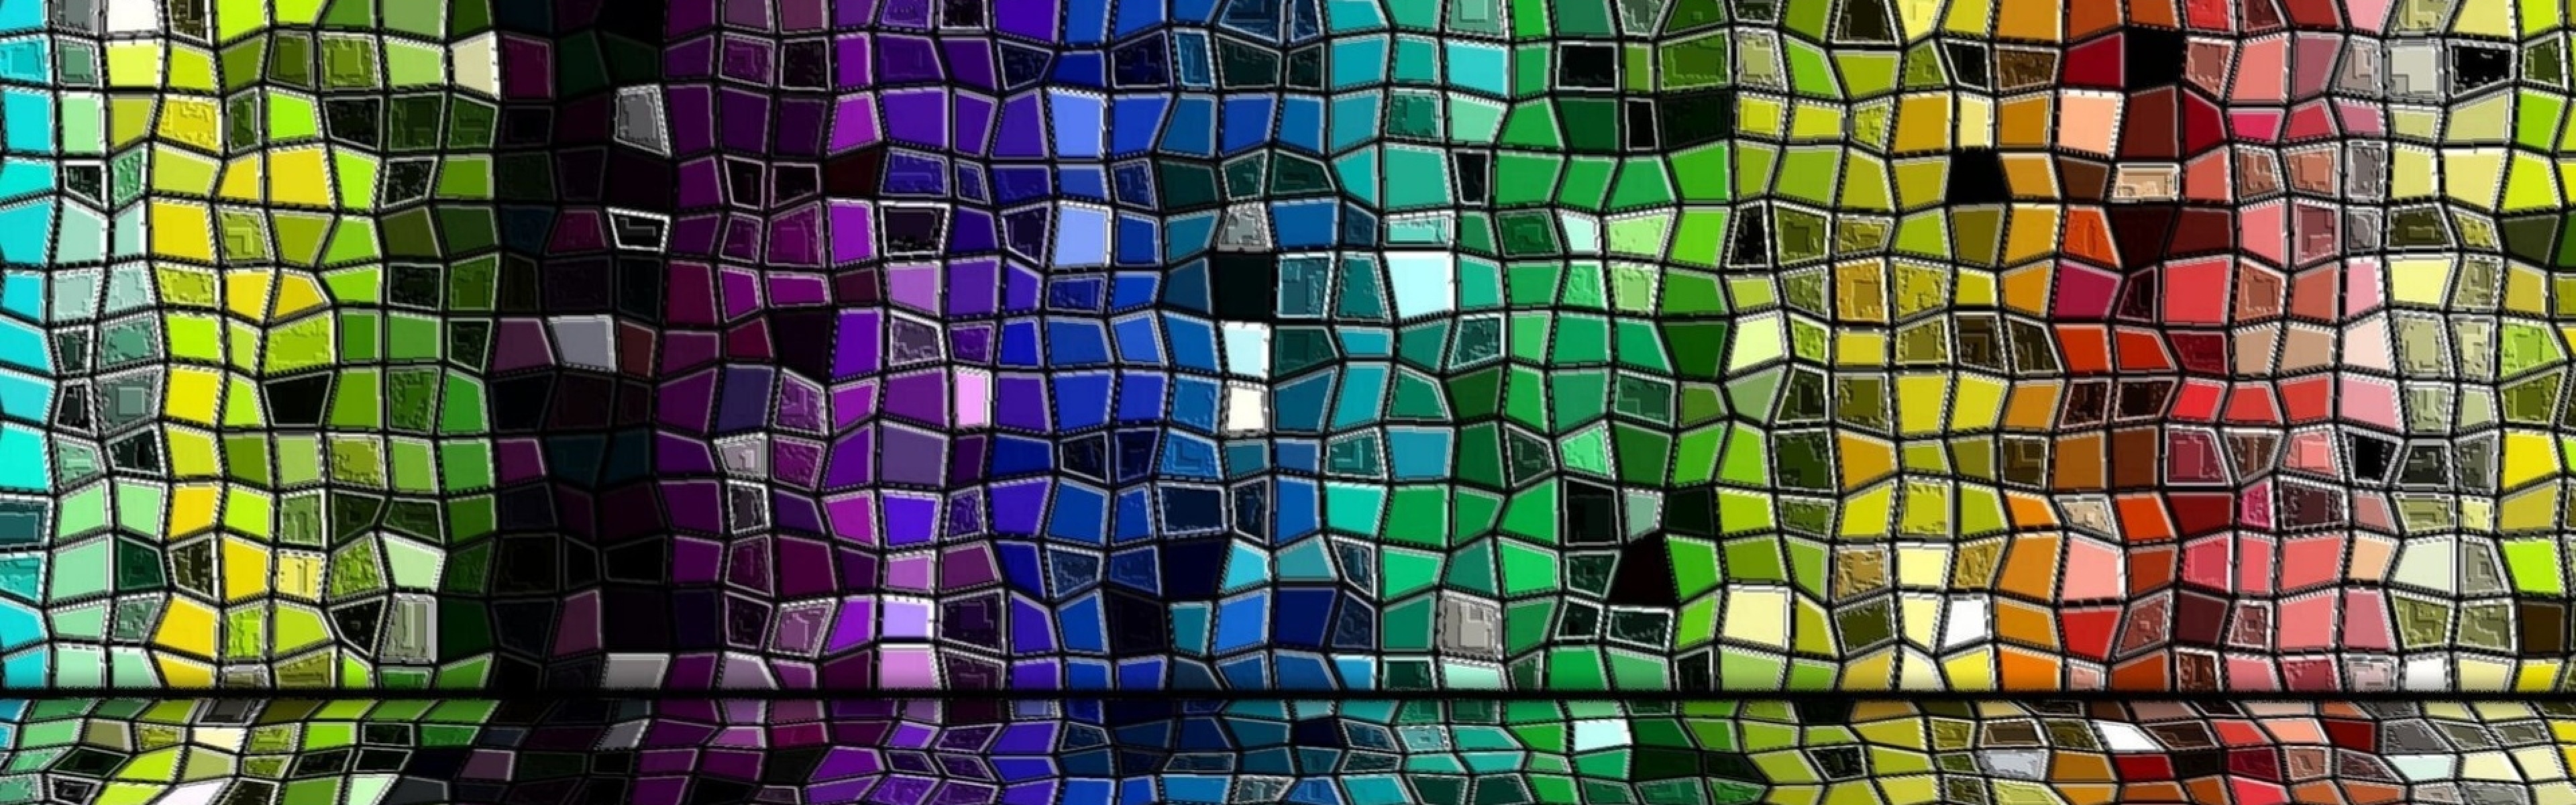 Download Wallpaper 3840x1200 Wall, Stained glass, Mosaics, Jewelry ...